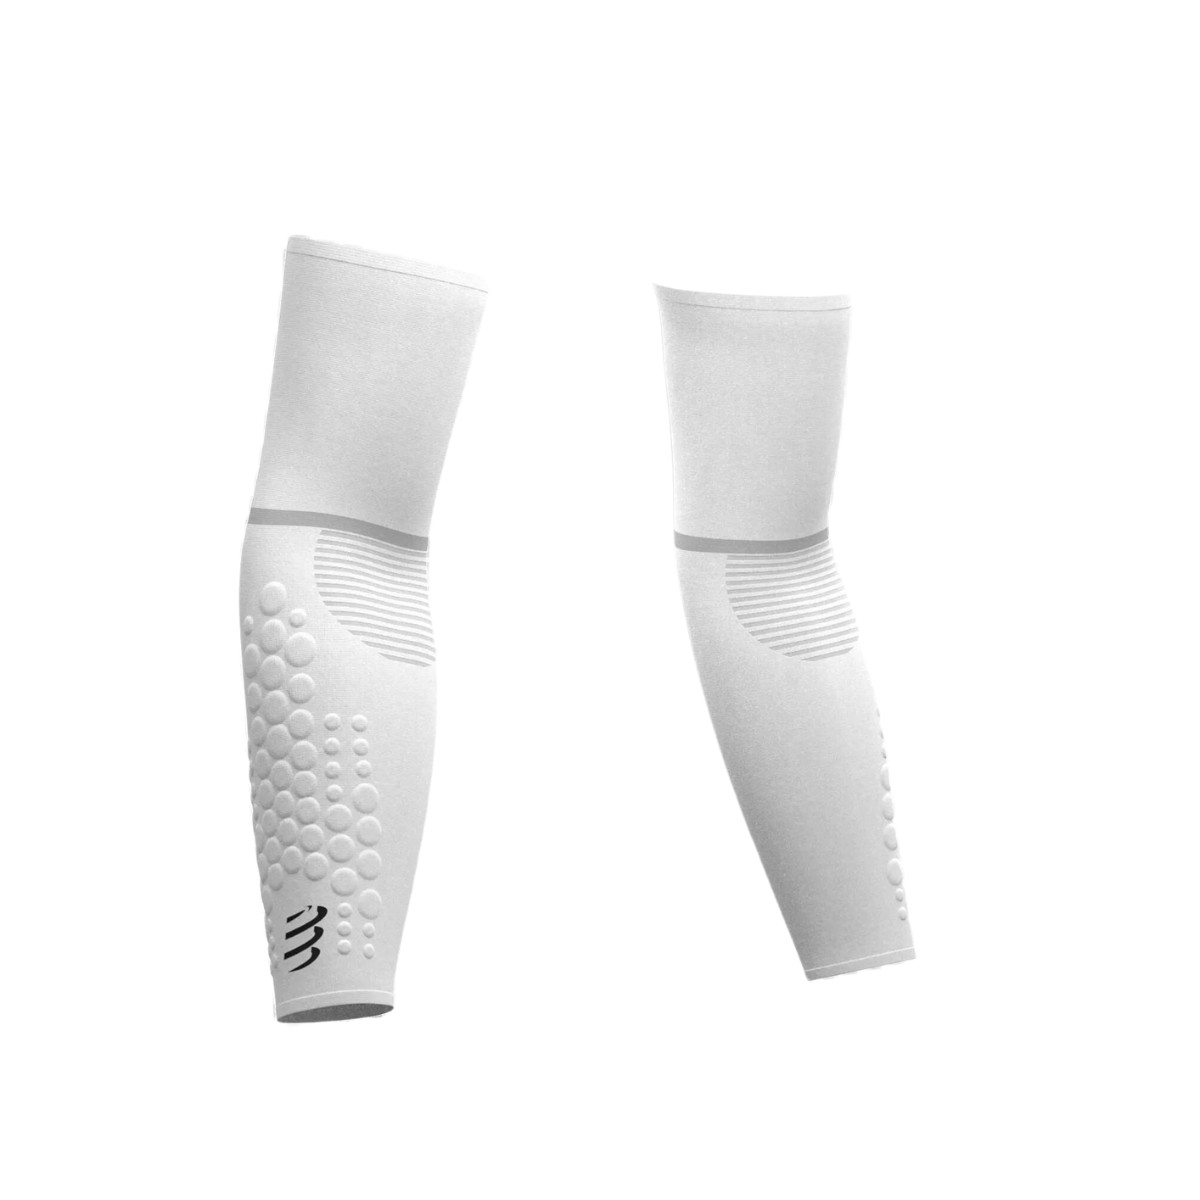 Manchons de Compression Compressport Arm Force Ultralight Blanc, Taille Taille 4